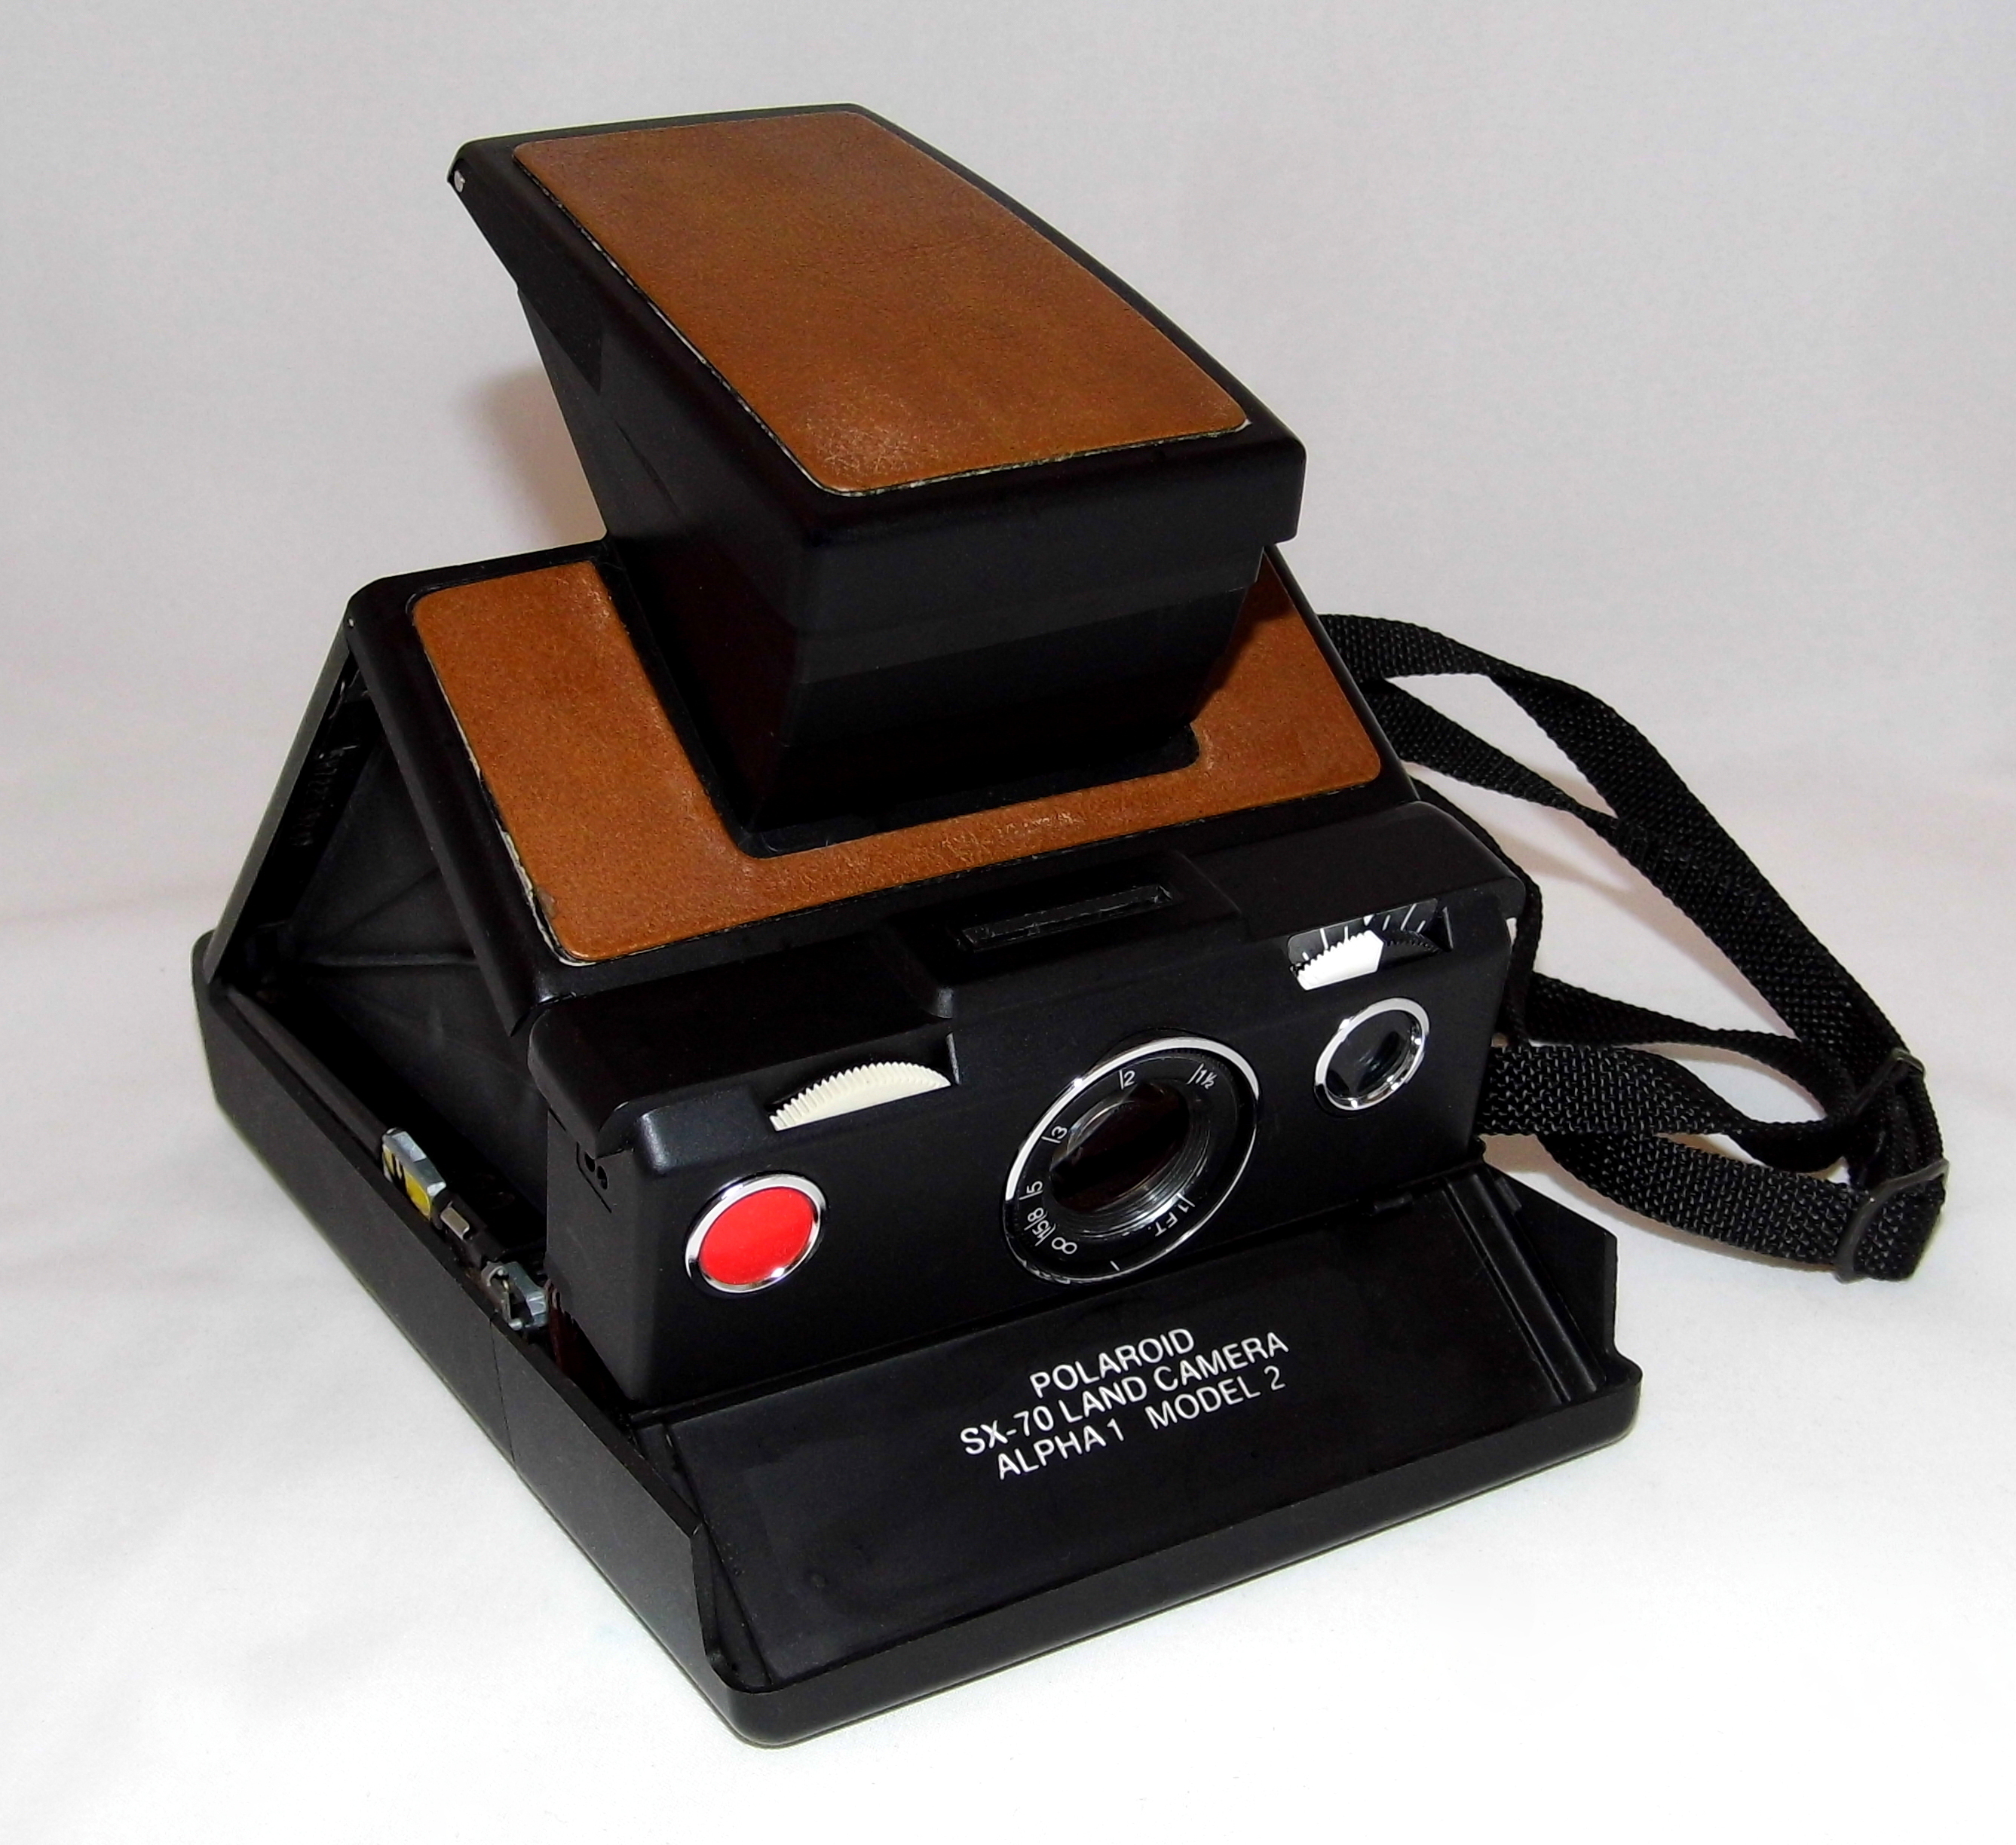 _Same_Features_As_The_SX-70_Model_1_Except_Finished_In_Black_Plastic_And_Brown_Porvair